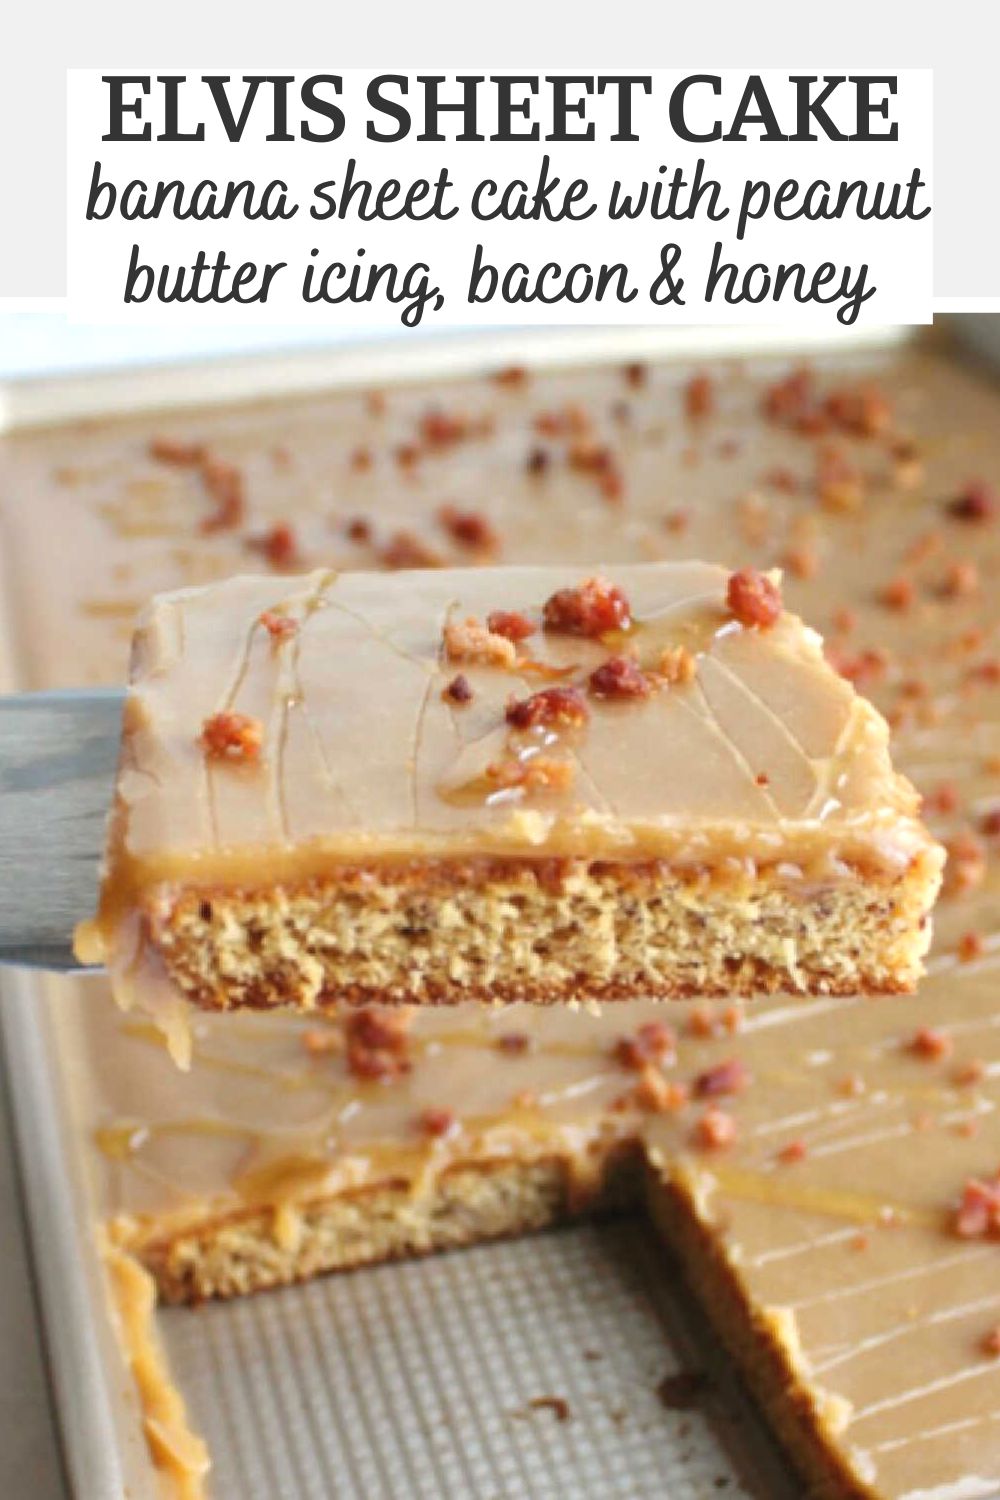 Elvis cake starts with a banana sheet cake topped with a glossy peanut butter icing. It would be delicious if you stopped there, but to make it an ode to Elvis himself we added some chopped bacon and a drizzle of honey. This cake is a fun way to turn the King's favorite sandwich into a really fun sheet cake.